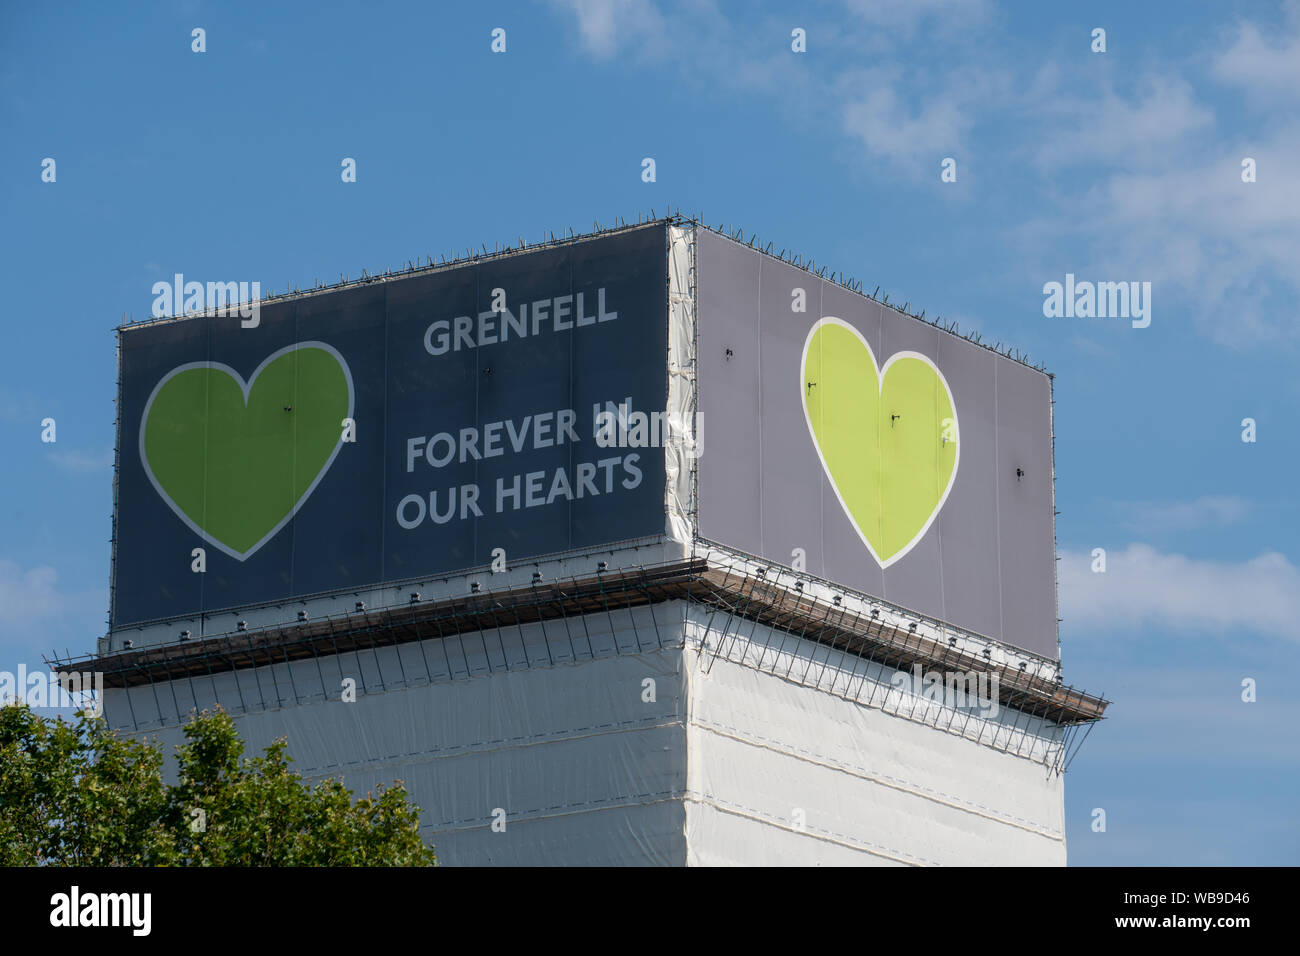 London / United Kingdom - August 25th 2019: Forever in our hearts support banner on the Grenfell tower Stock Photo